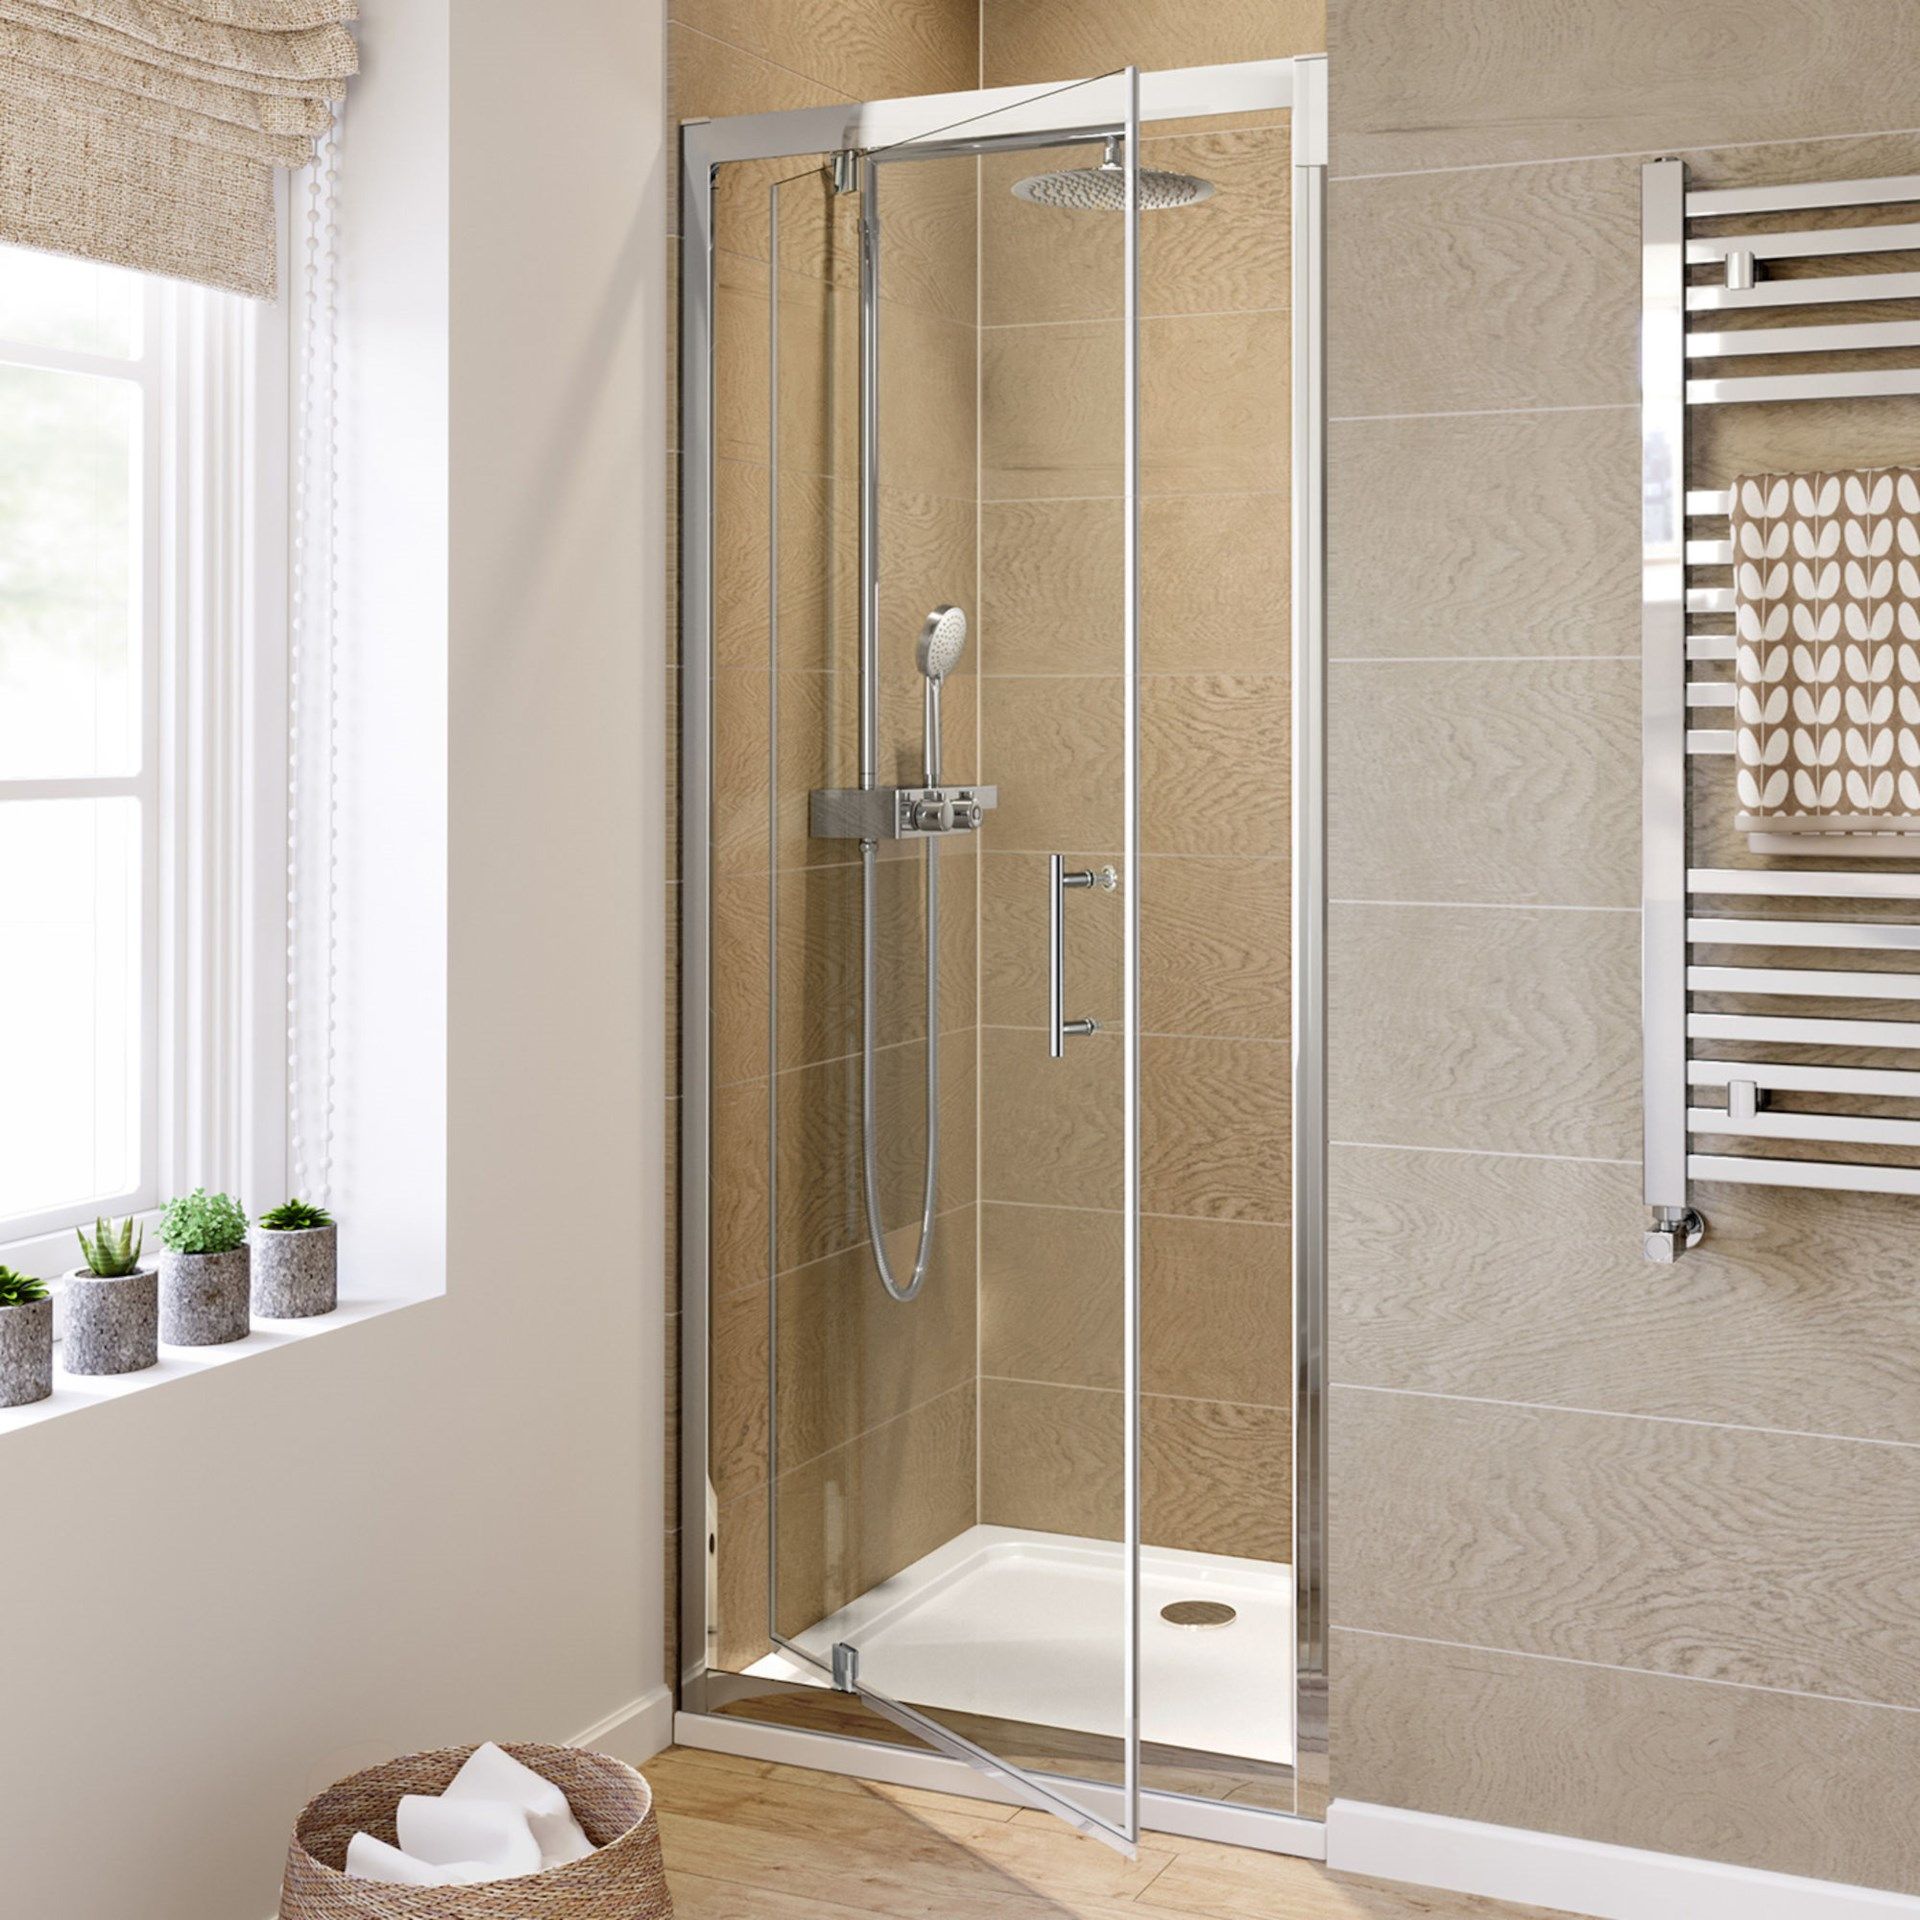 Brand New Twyfords 700mm - 6mm - Premium Pivot Shower Door. RRP £299.99.8mm Safety Glass Fully water - Image 3 of 3